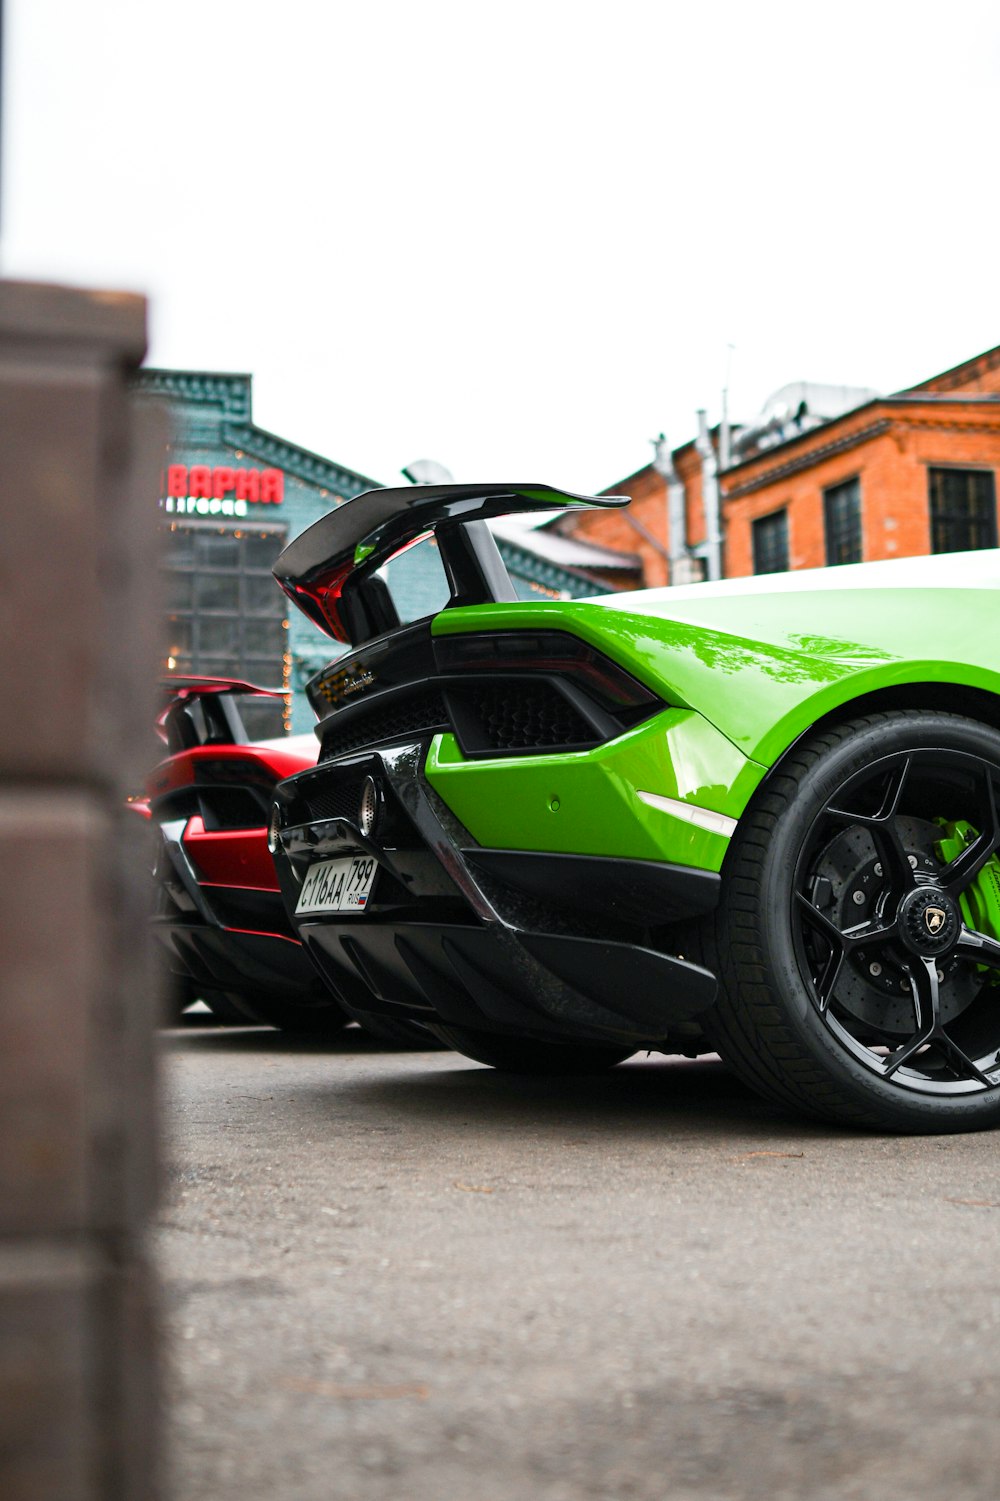 a green and black sports car parked in a parking lot